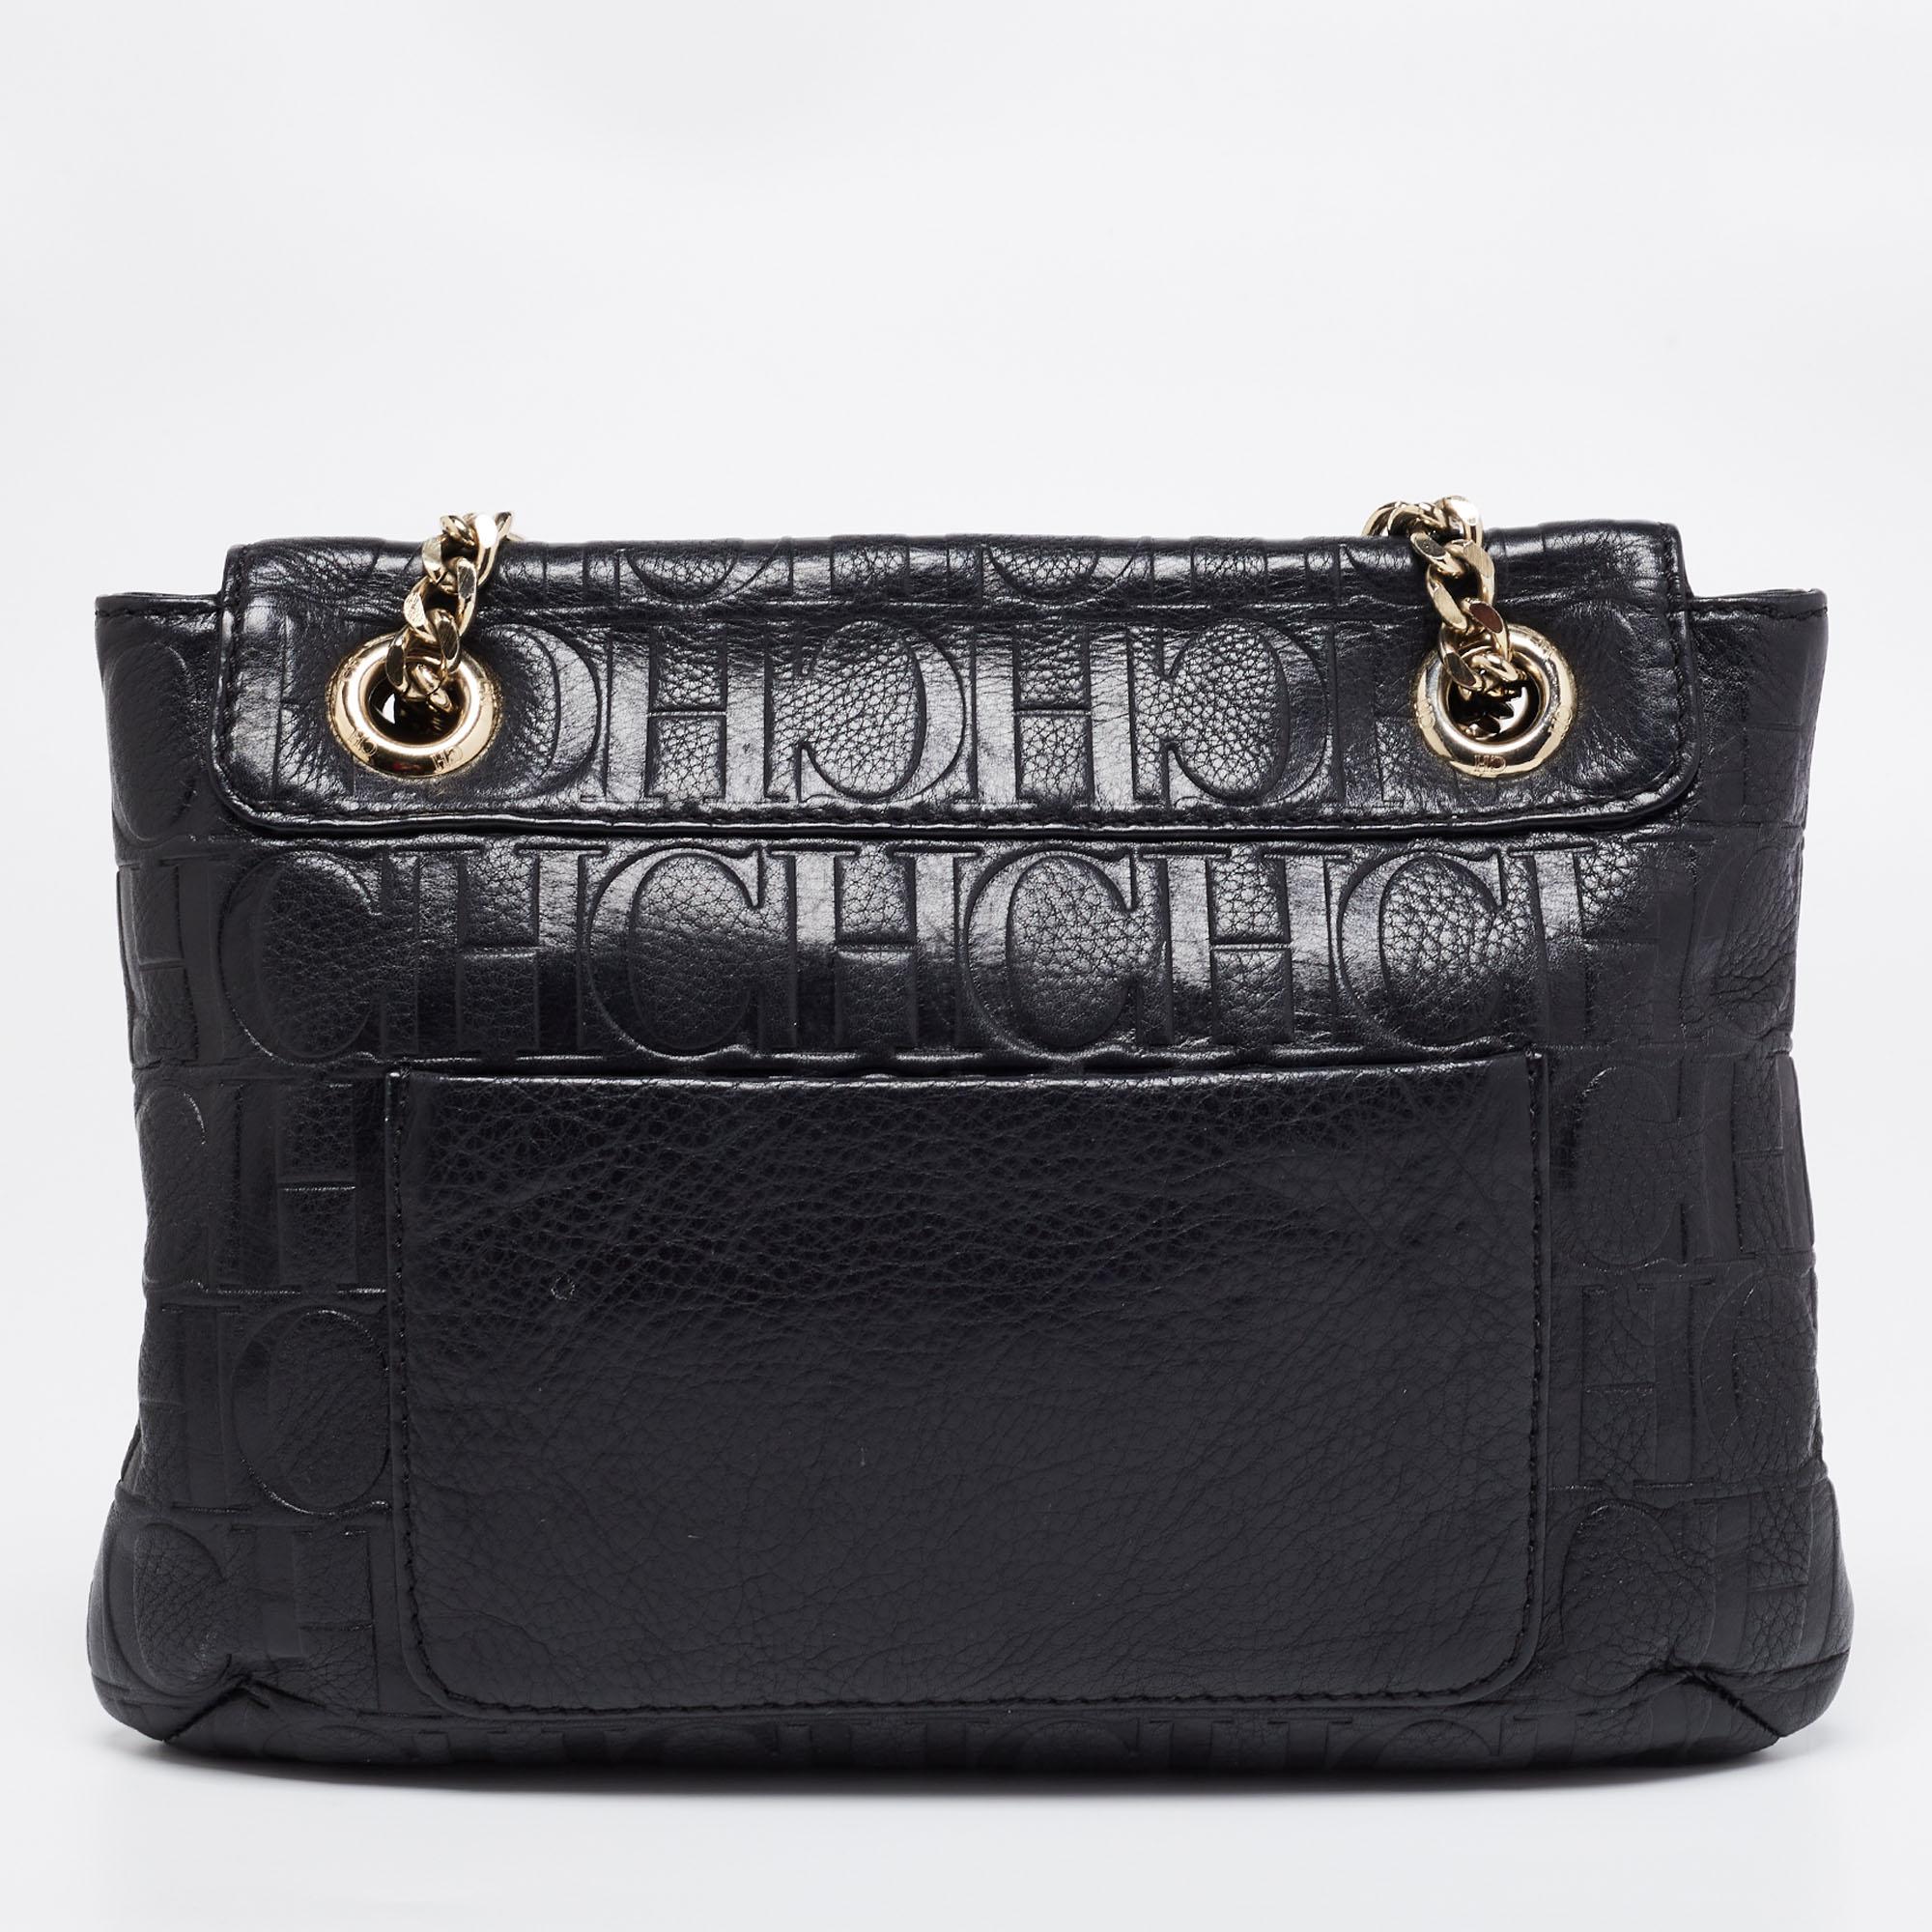 The Audrey bag from CH Carolina Herrera remains a loved creation from the label. This bag is created using monogram-embossed leather in a spacious size and has gold-toned implements to complement the black exterior.

